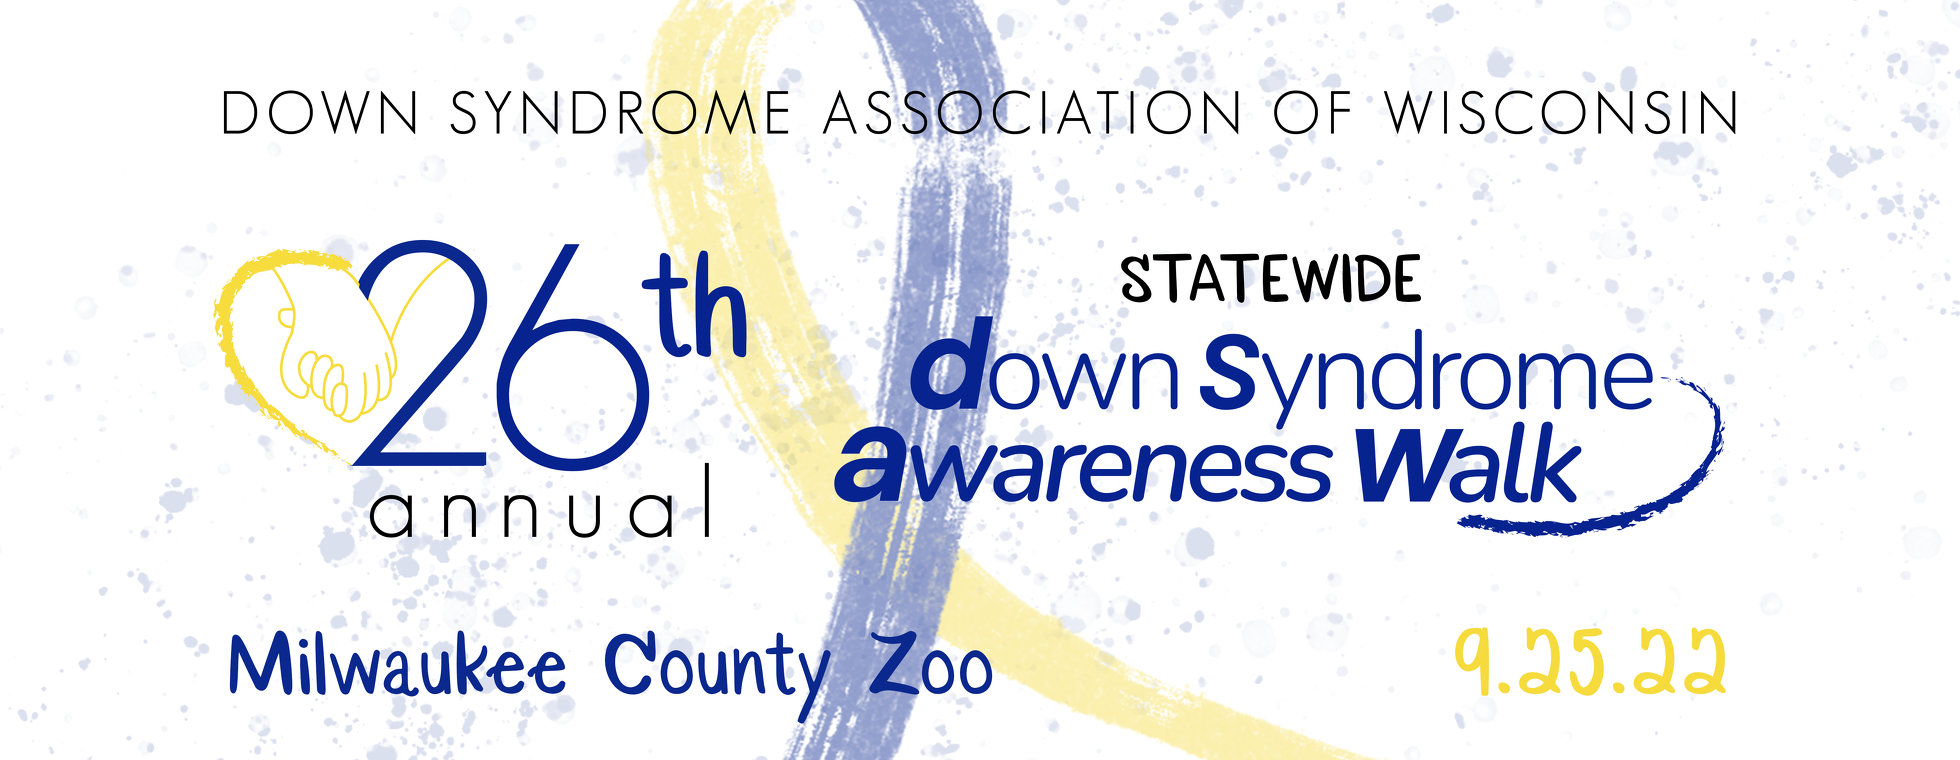 26th Annual Statewide Down Syndrome Awareness Walk 2022